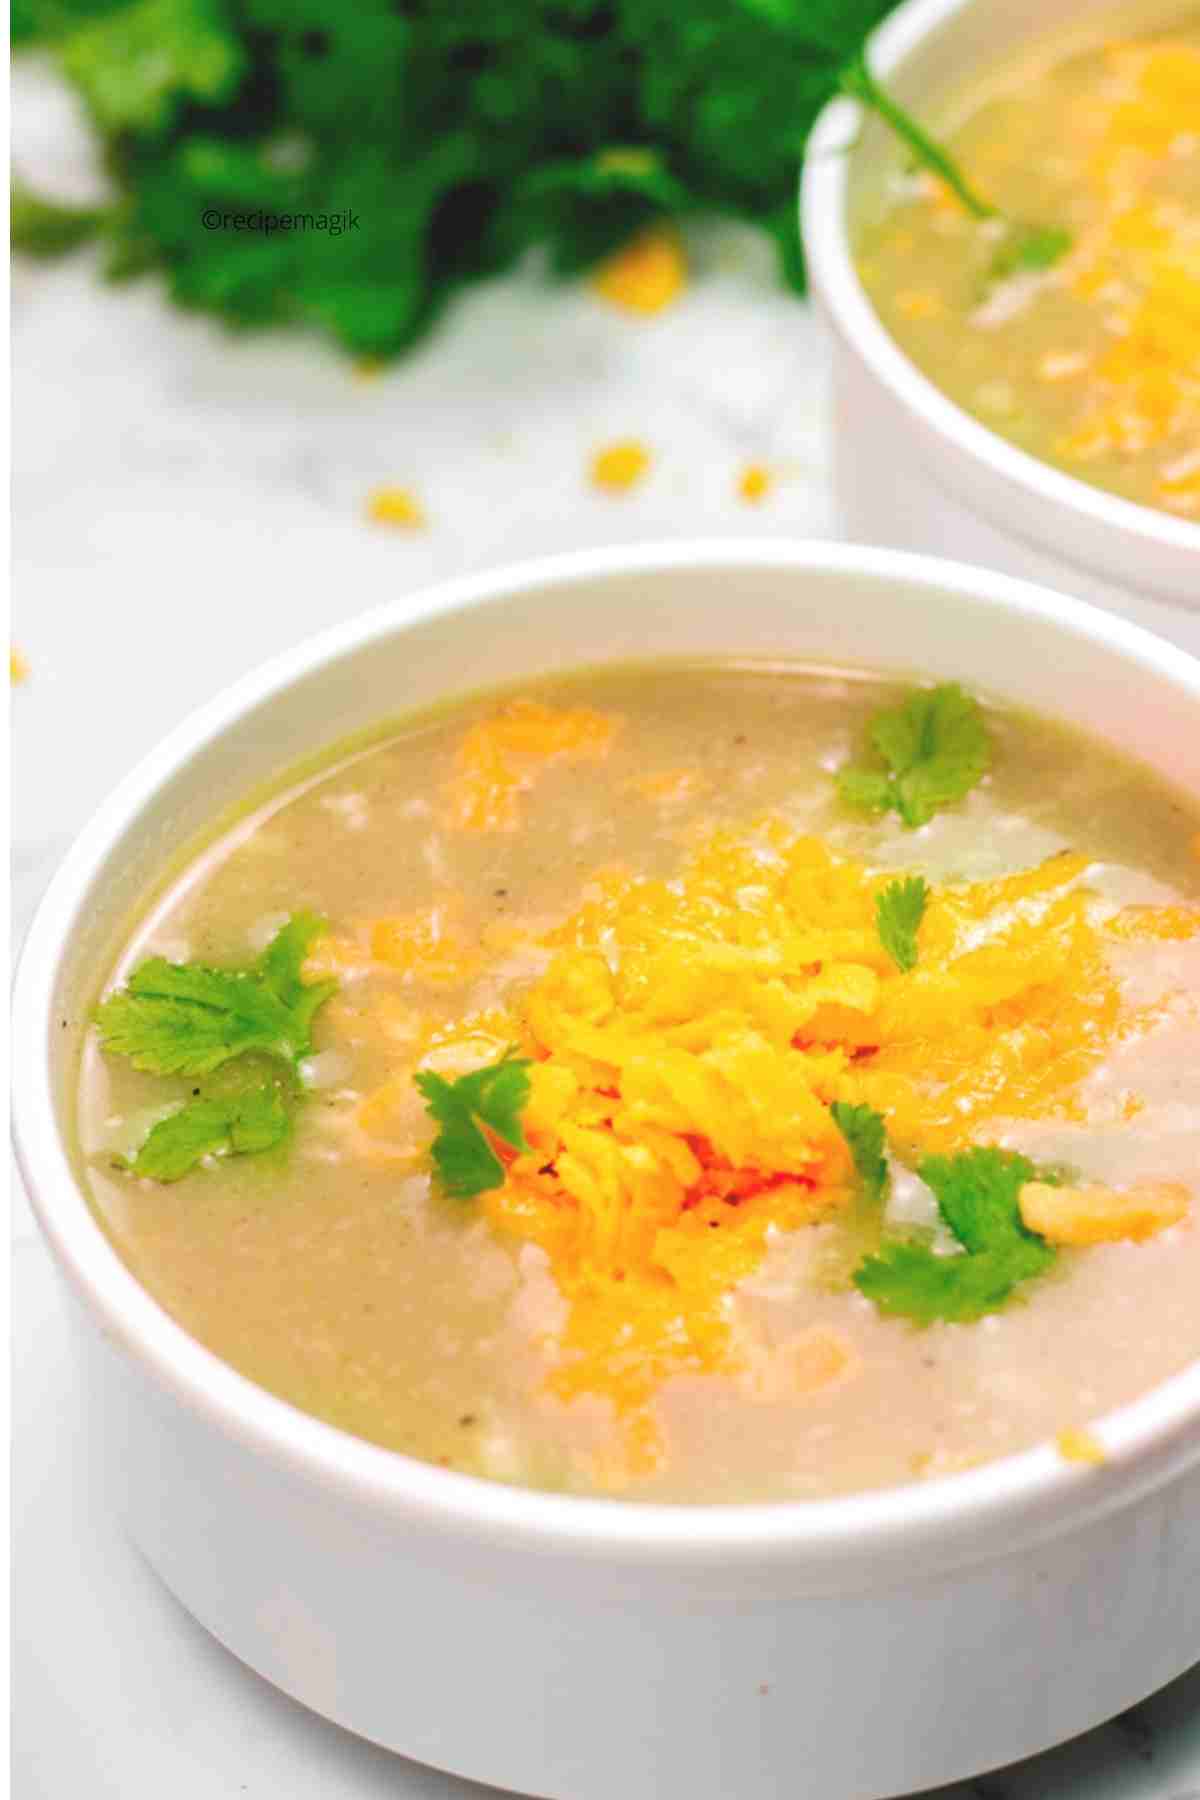 Creamy Potato Soup with cheddar cheese and parsley